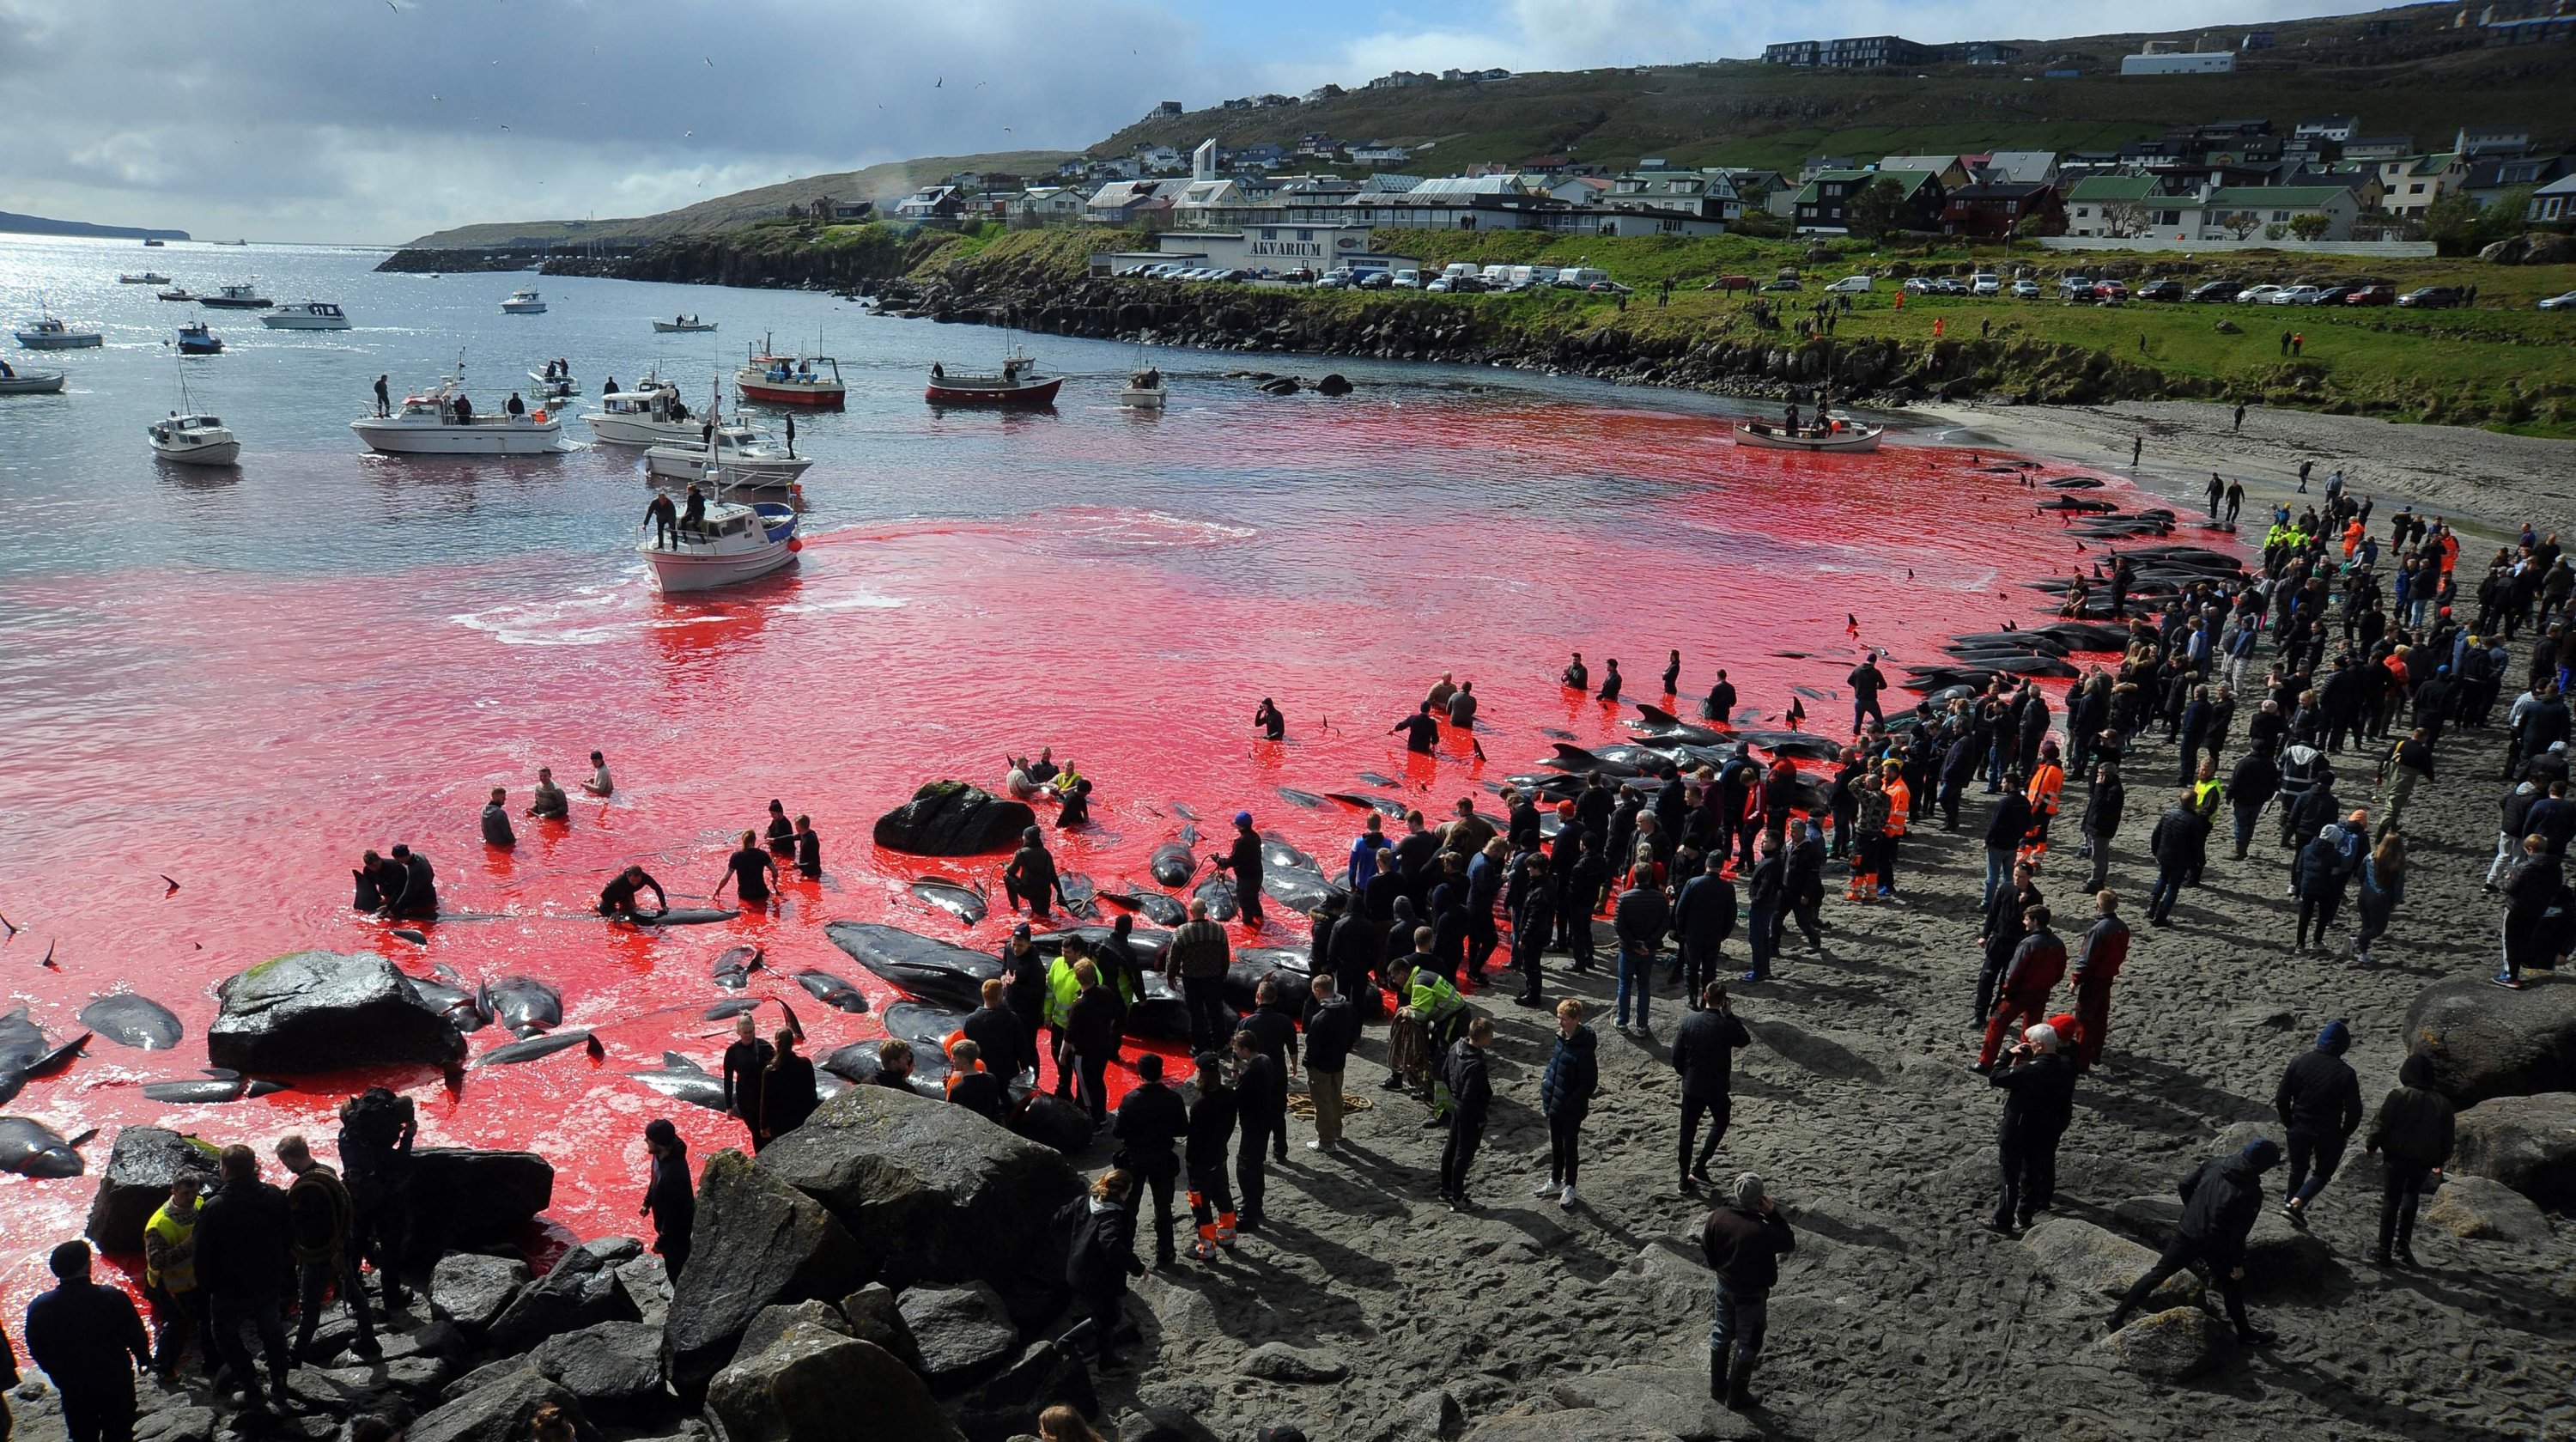 People gather in front of the sea, colored red, during a pilot whale hunt in Torshavn, Faroe Islands, May 29, 2019. (AFP Photo)